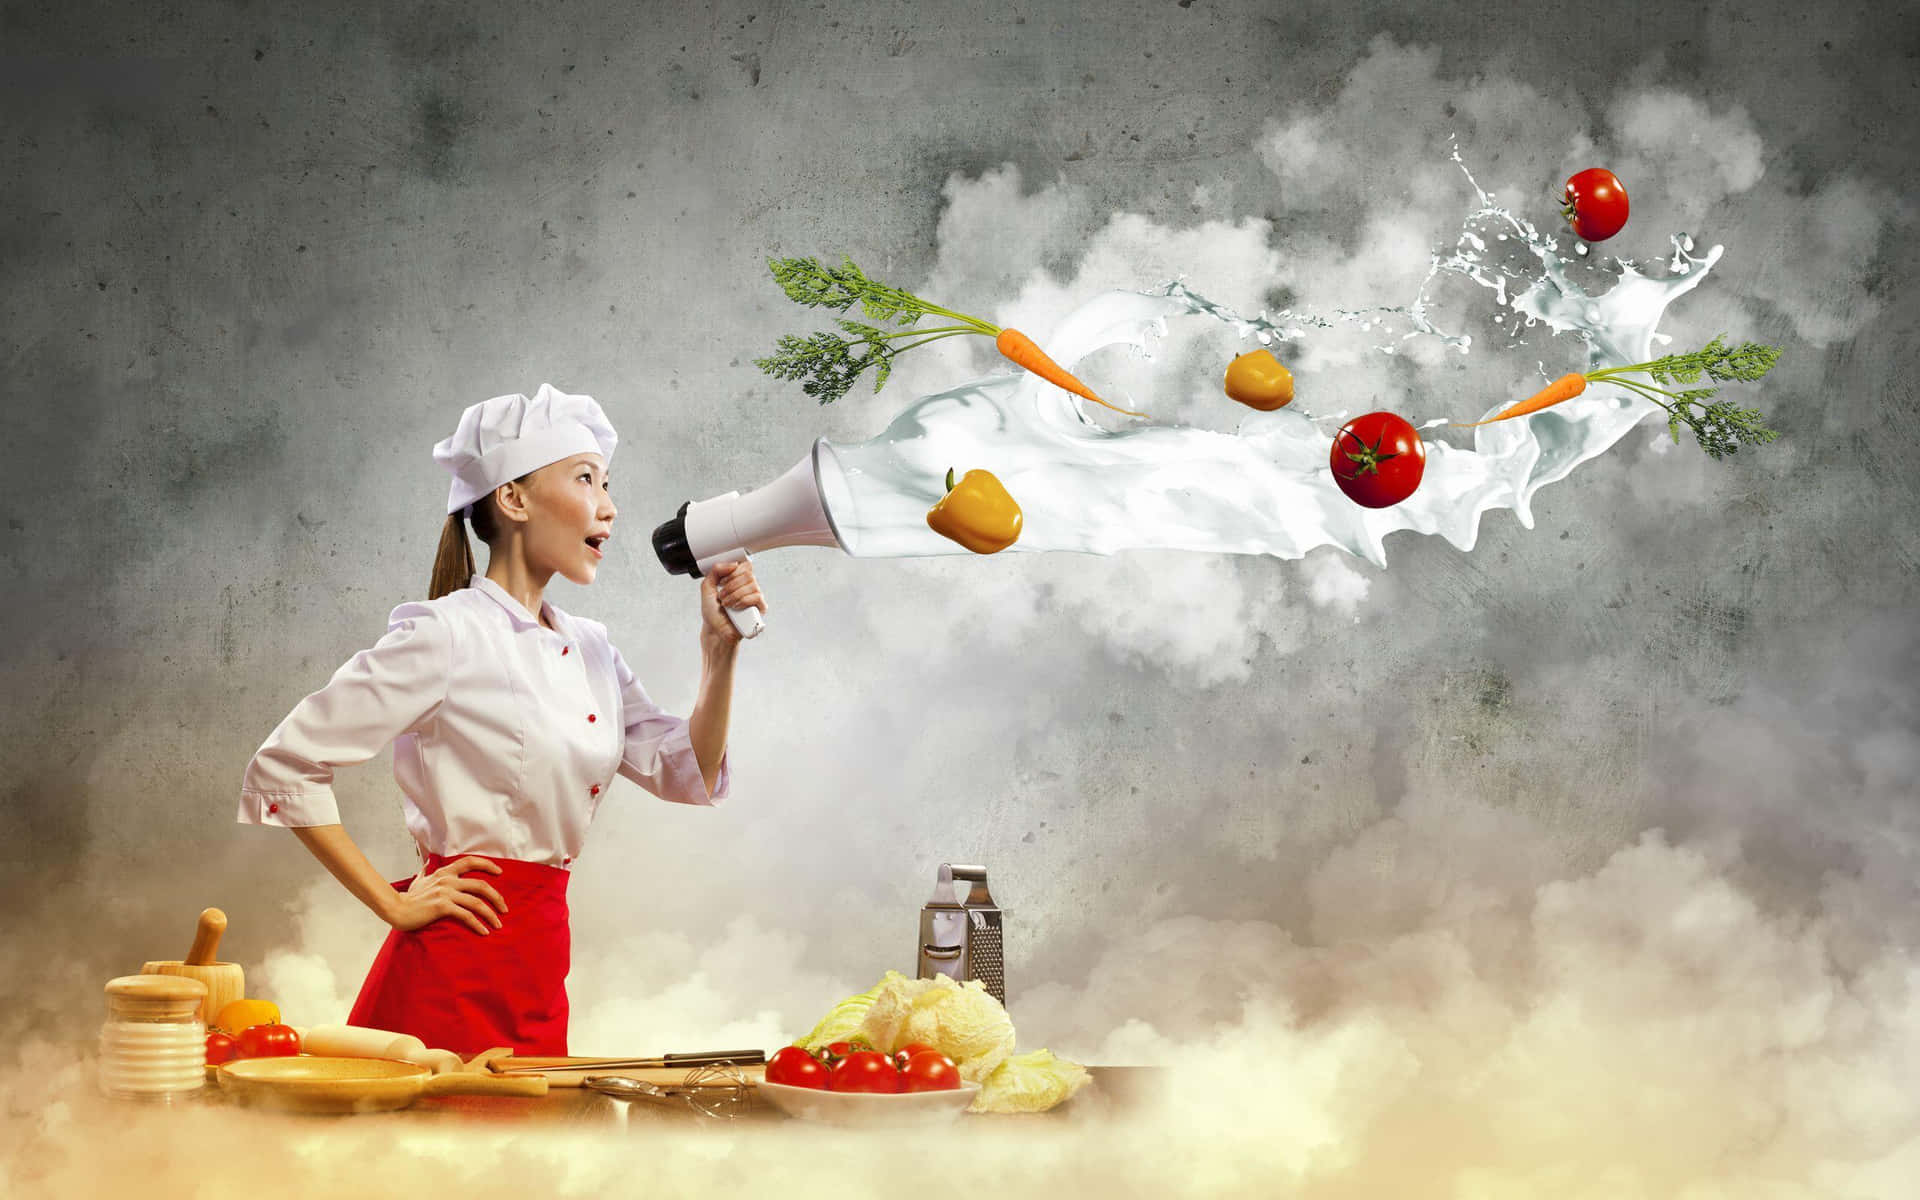 Capture your love of cooking with a delicious background.